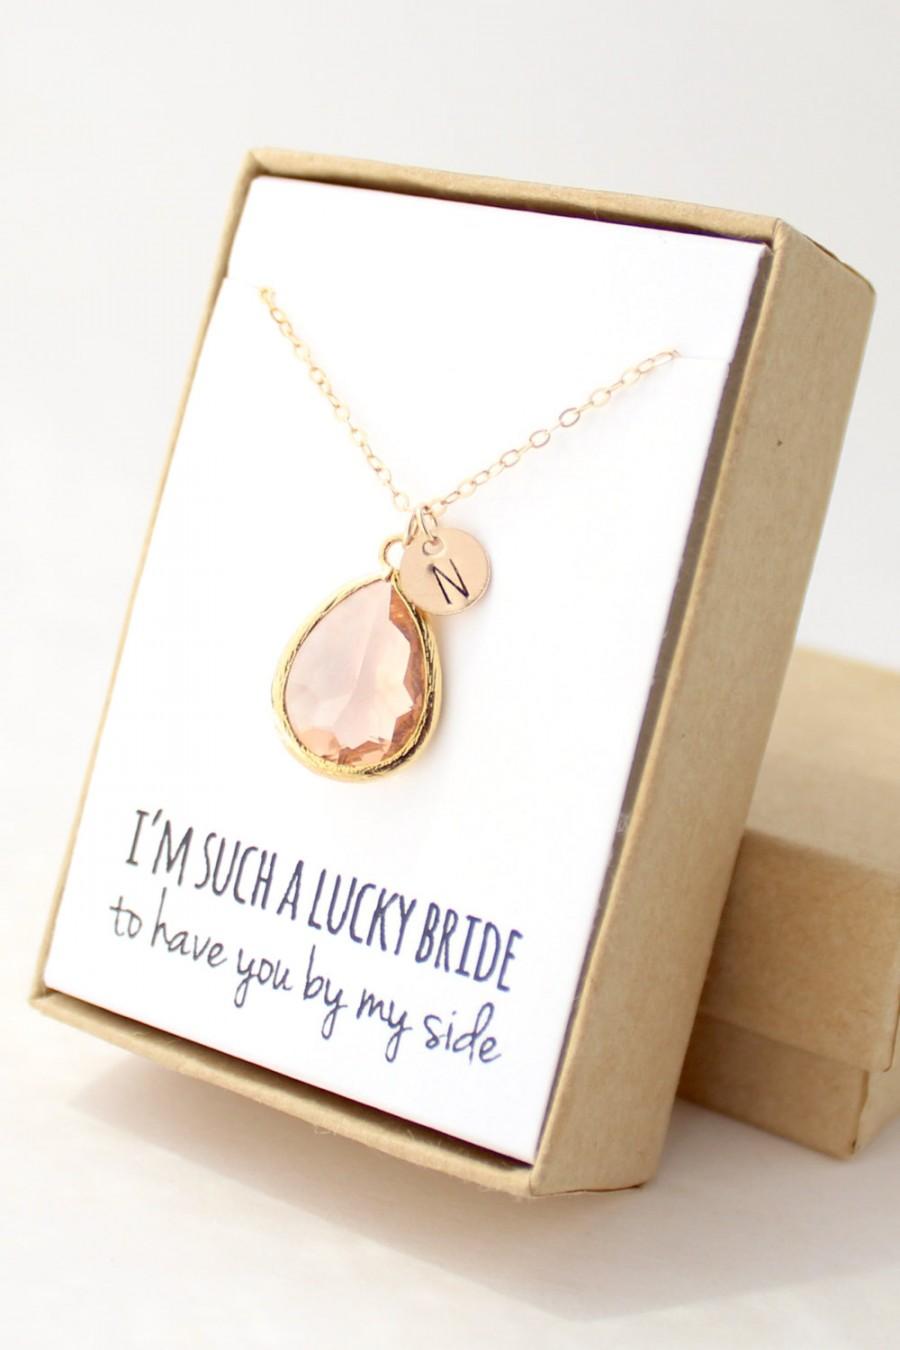 Hochzeit - Peach Champagne / Gold Teardrop Necklace - Peach Champagne Bridesmaid Necklace - Bridesmaid Gift Jewelry - Peach and Gold Necklace - NB1